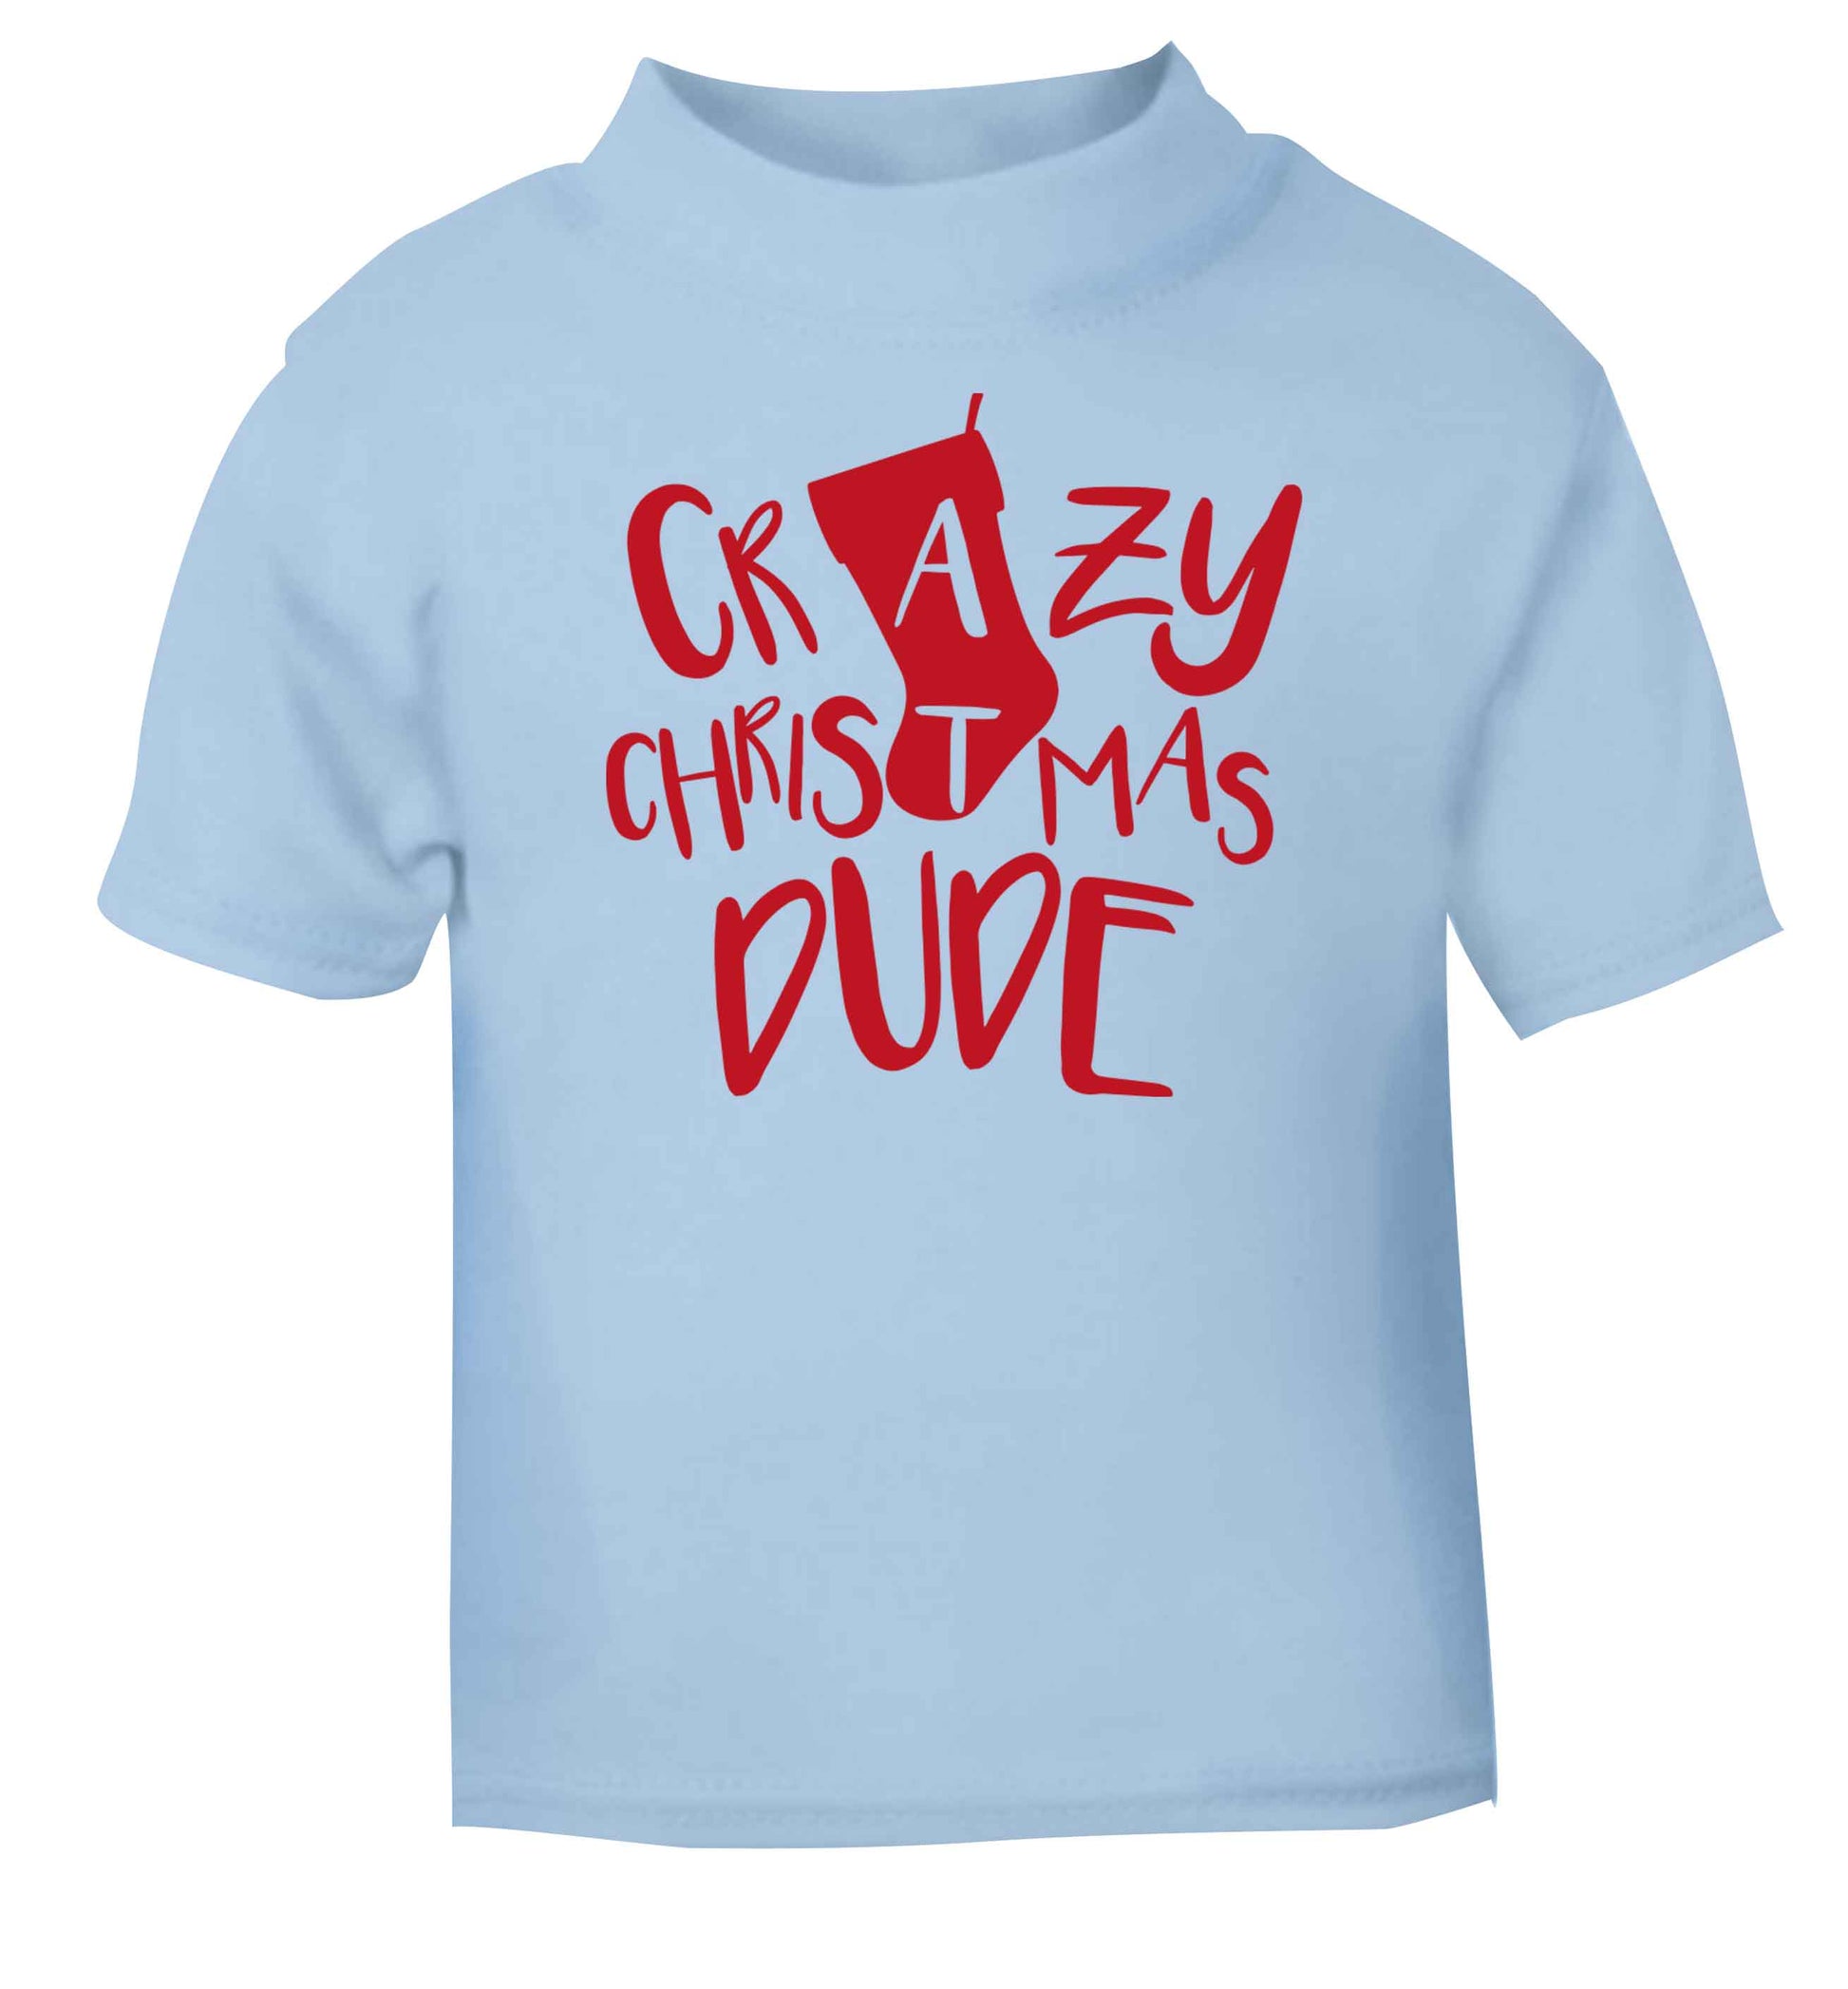 Crazy Christmas Dude light blue baby toddler Tshirt 2 Years